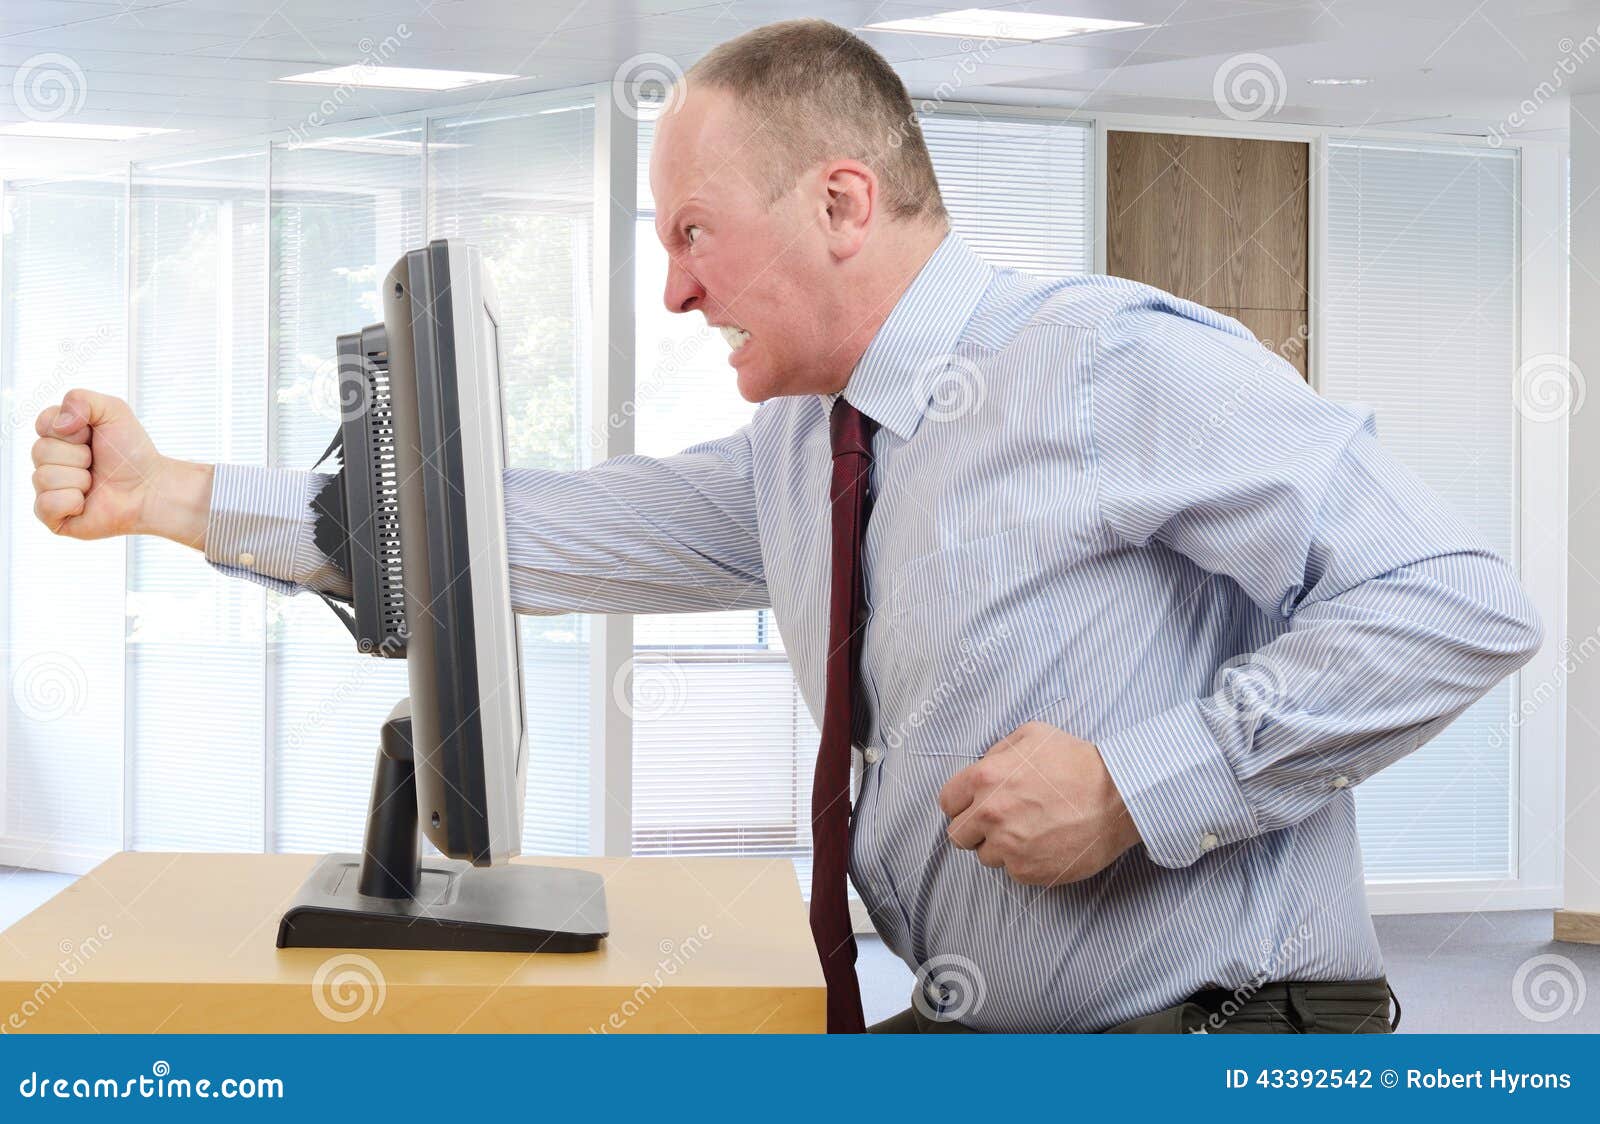 Bad day stock photo. Image of breaking, frustration, adult - 43392542